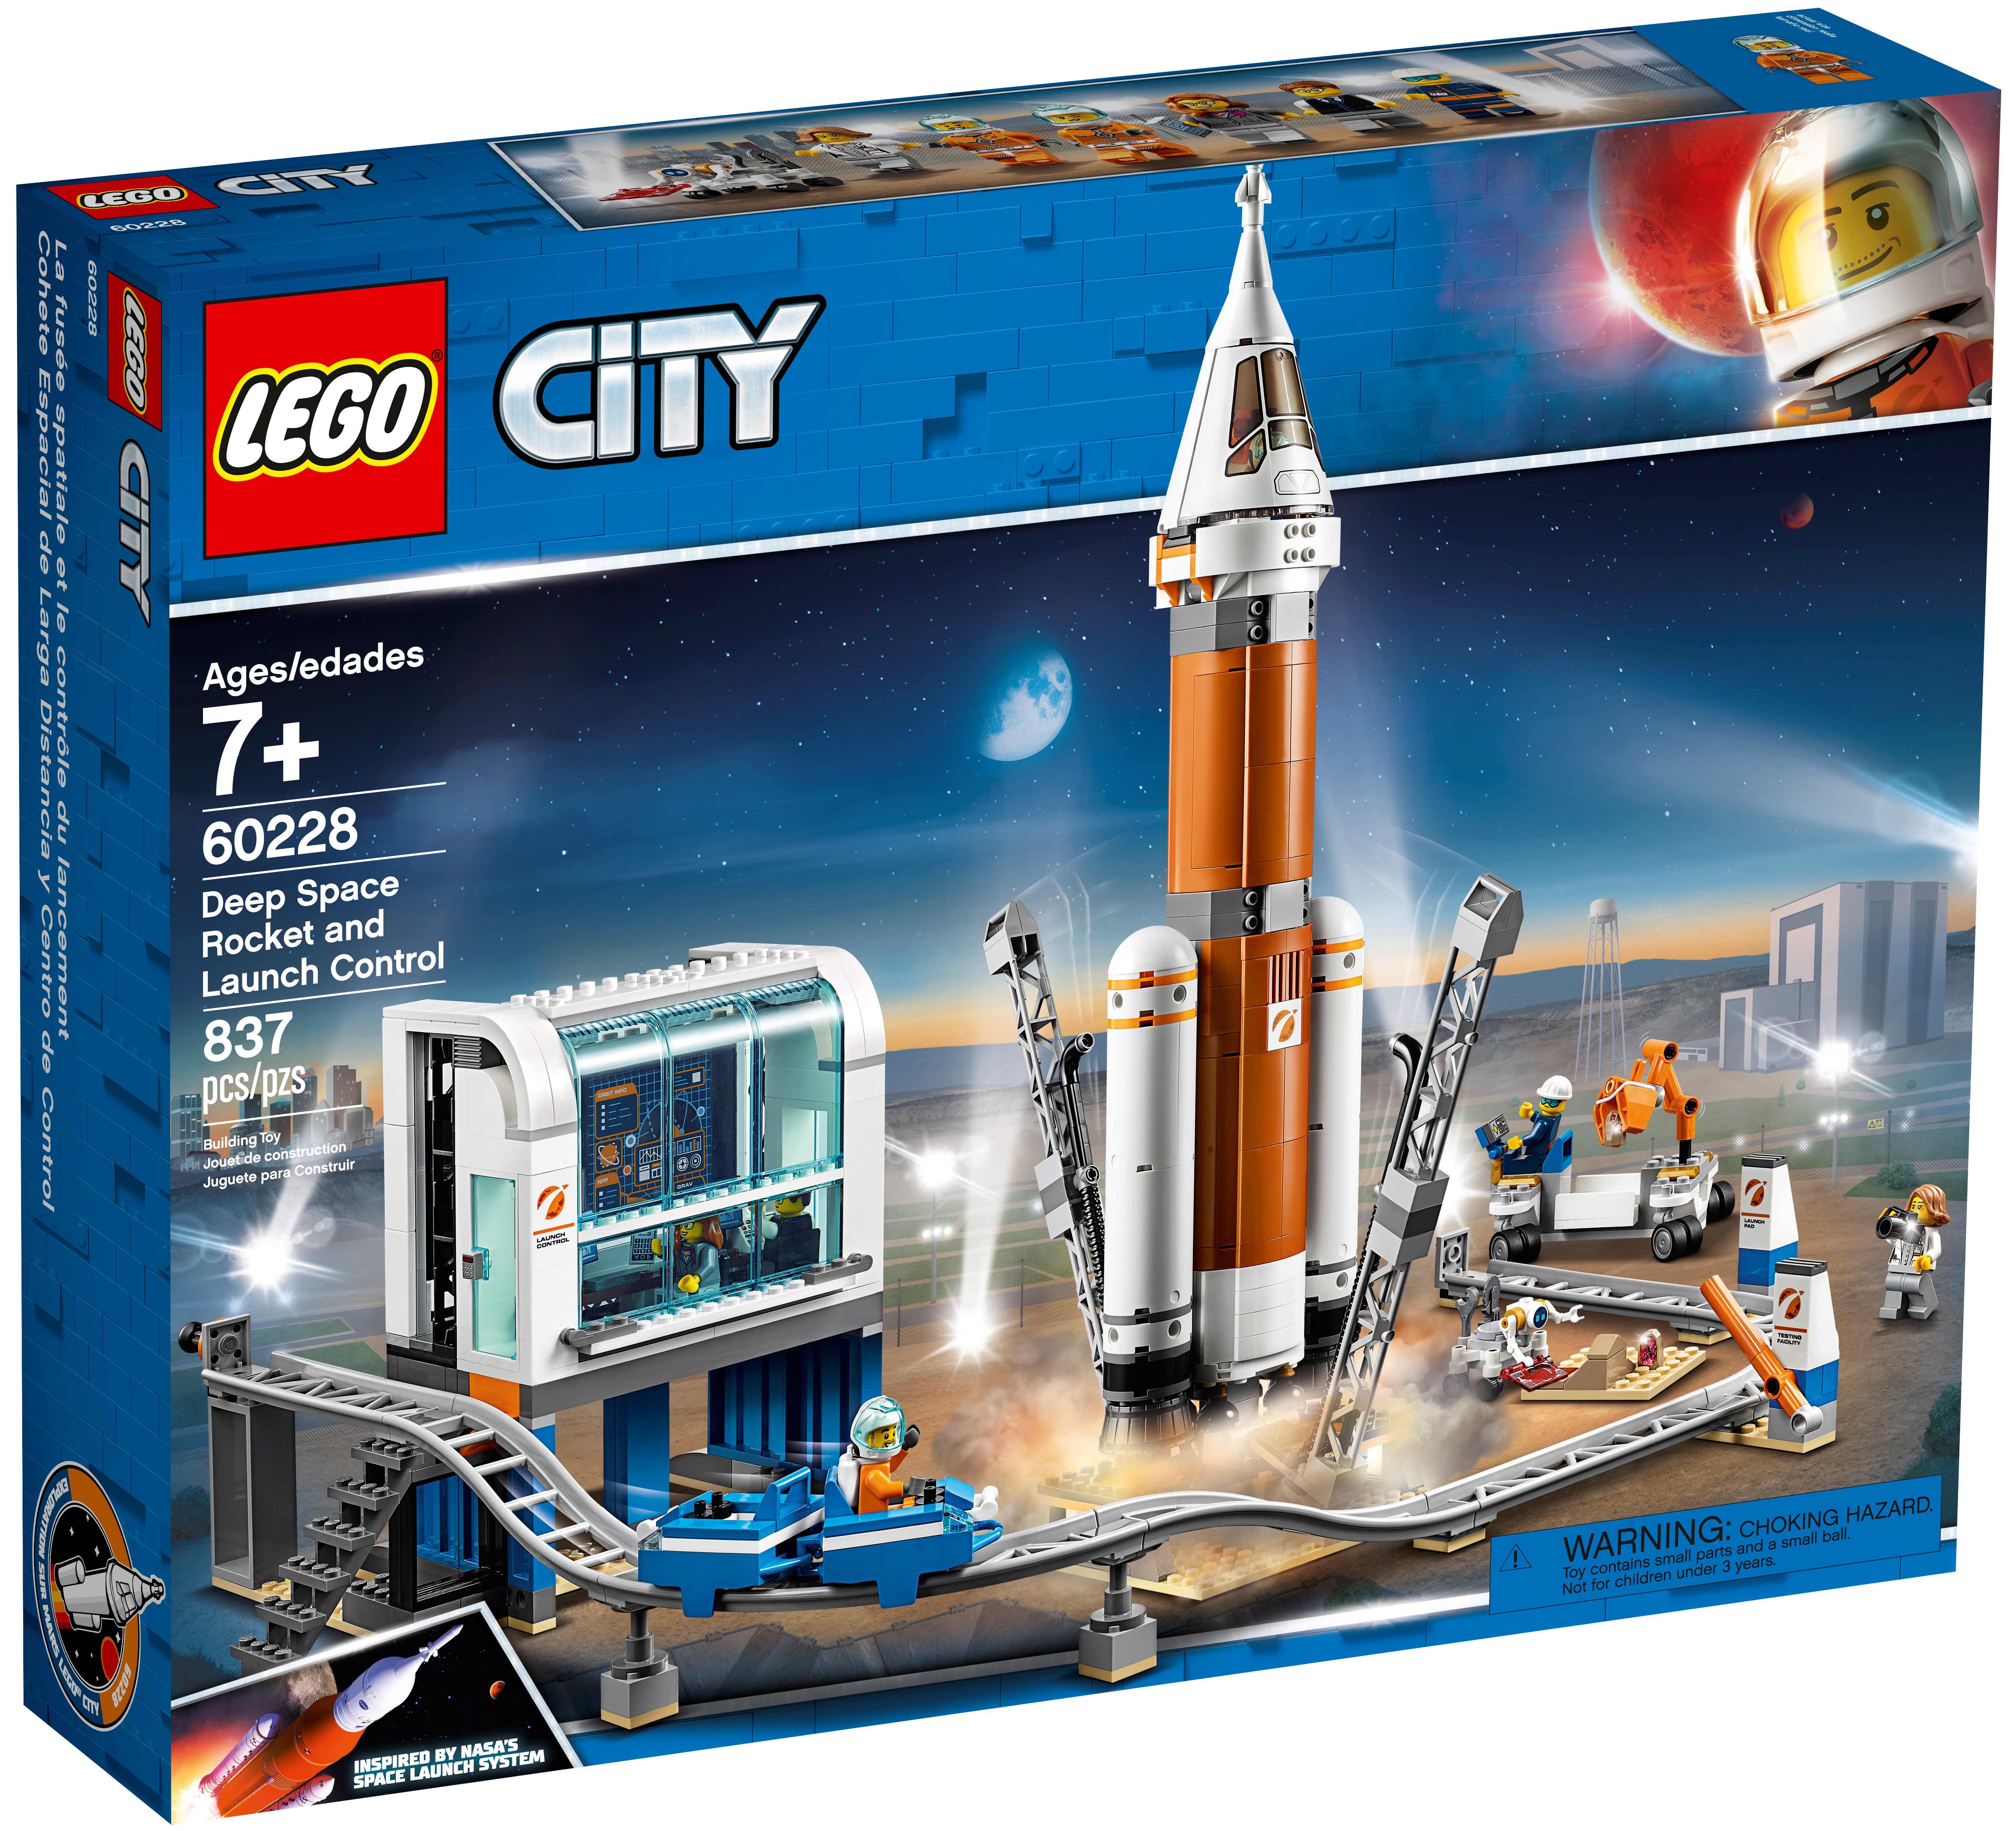 Deep Space Rocket and Launch Control | City Buy online at the Official LEGO® Shop GB